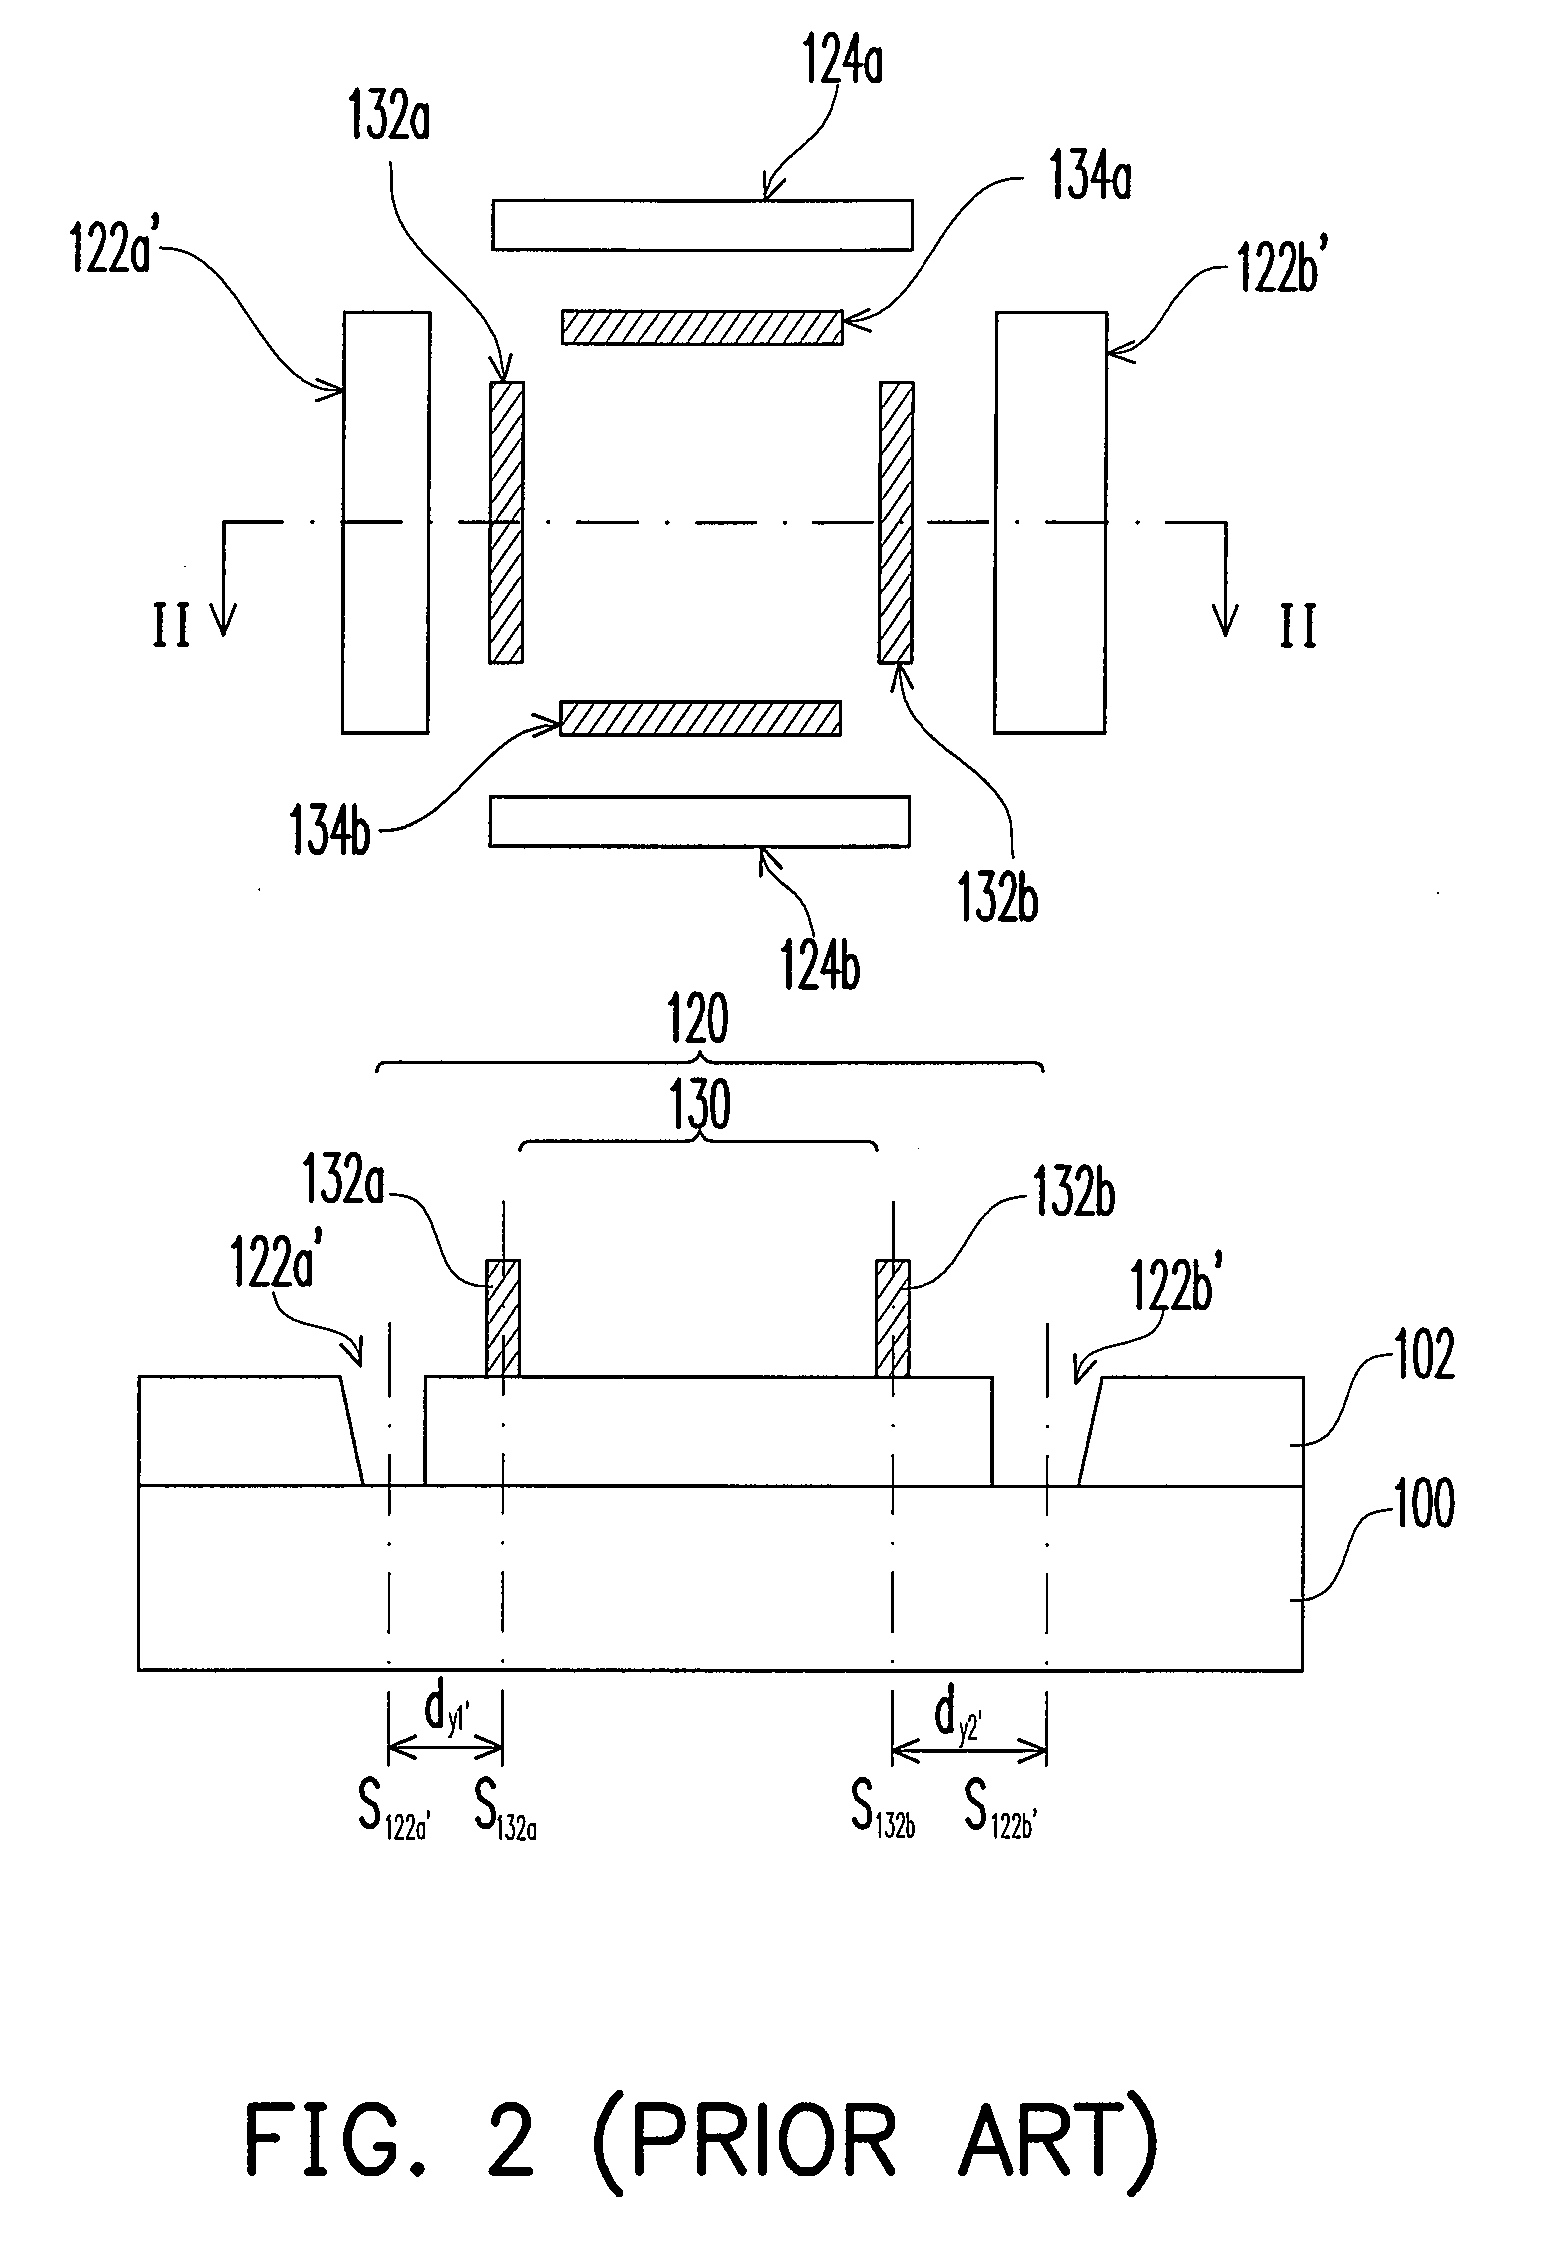 Method for checking alignment accuracy using overlay mark